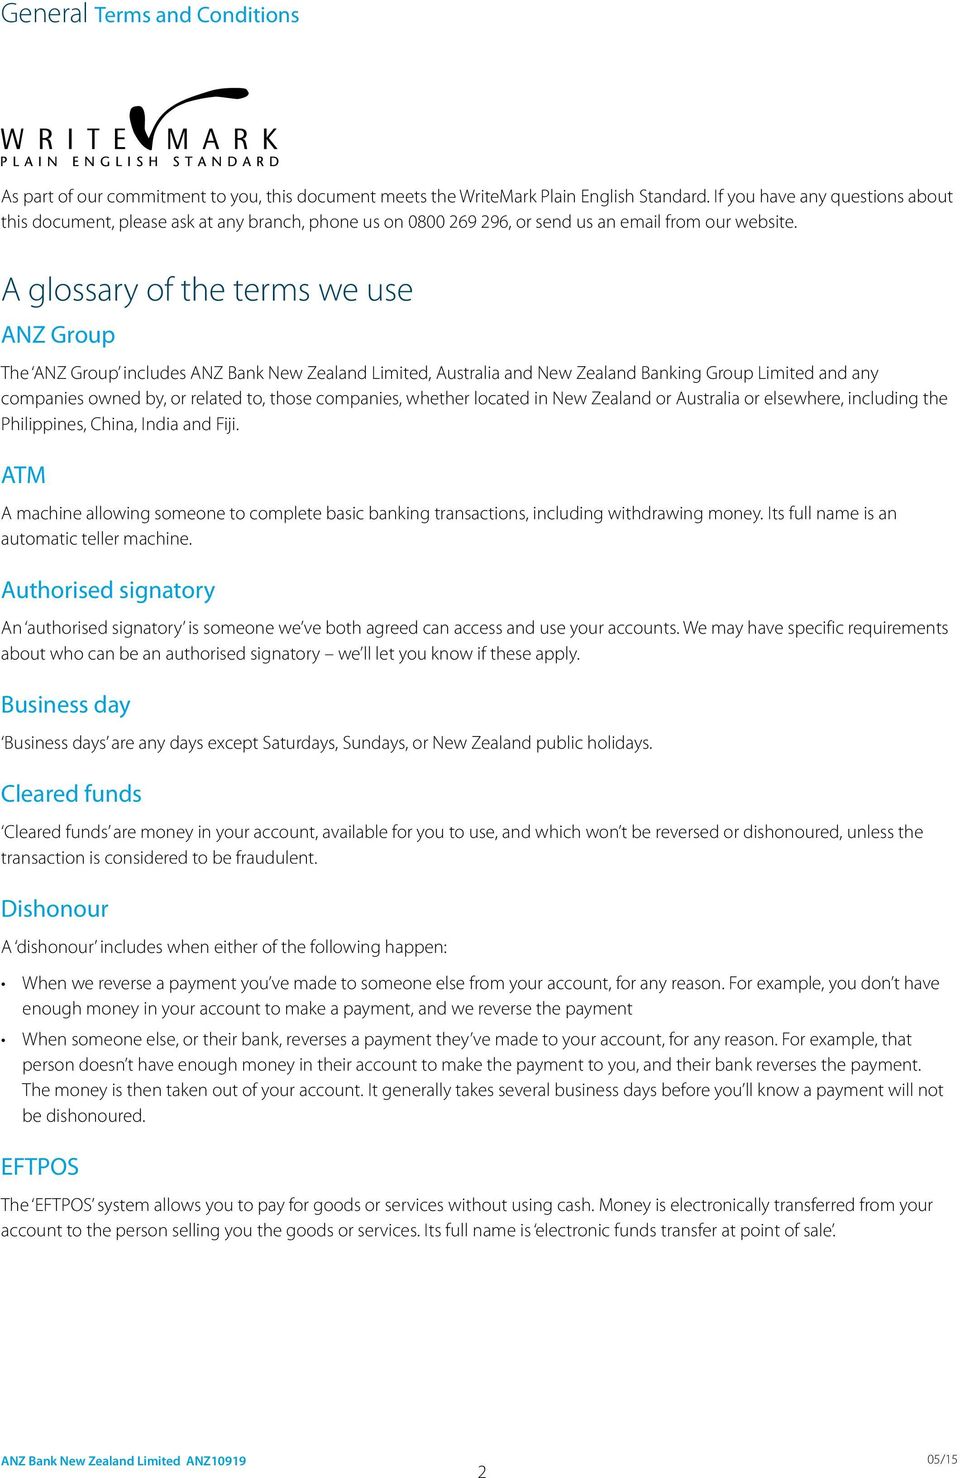 A glossary of the terms we use ANZ Group The ANZ Group includes ANZ Bank New Zealand Limited, Australia and New Zealand Banking Group Limited and any companies owned by, or related to, those